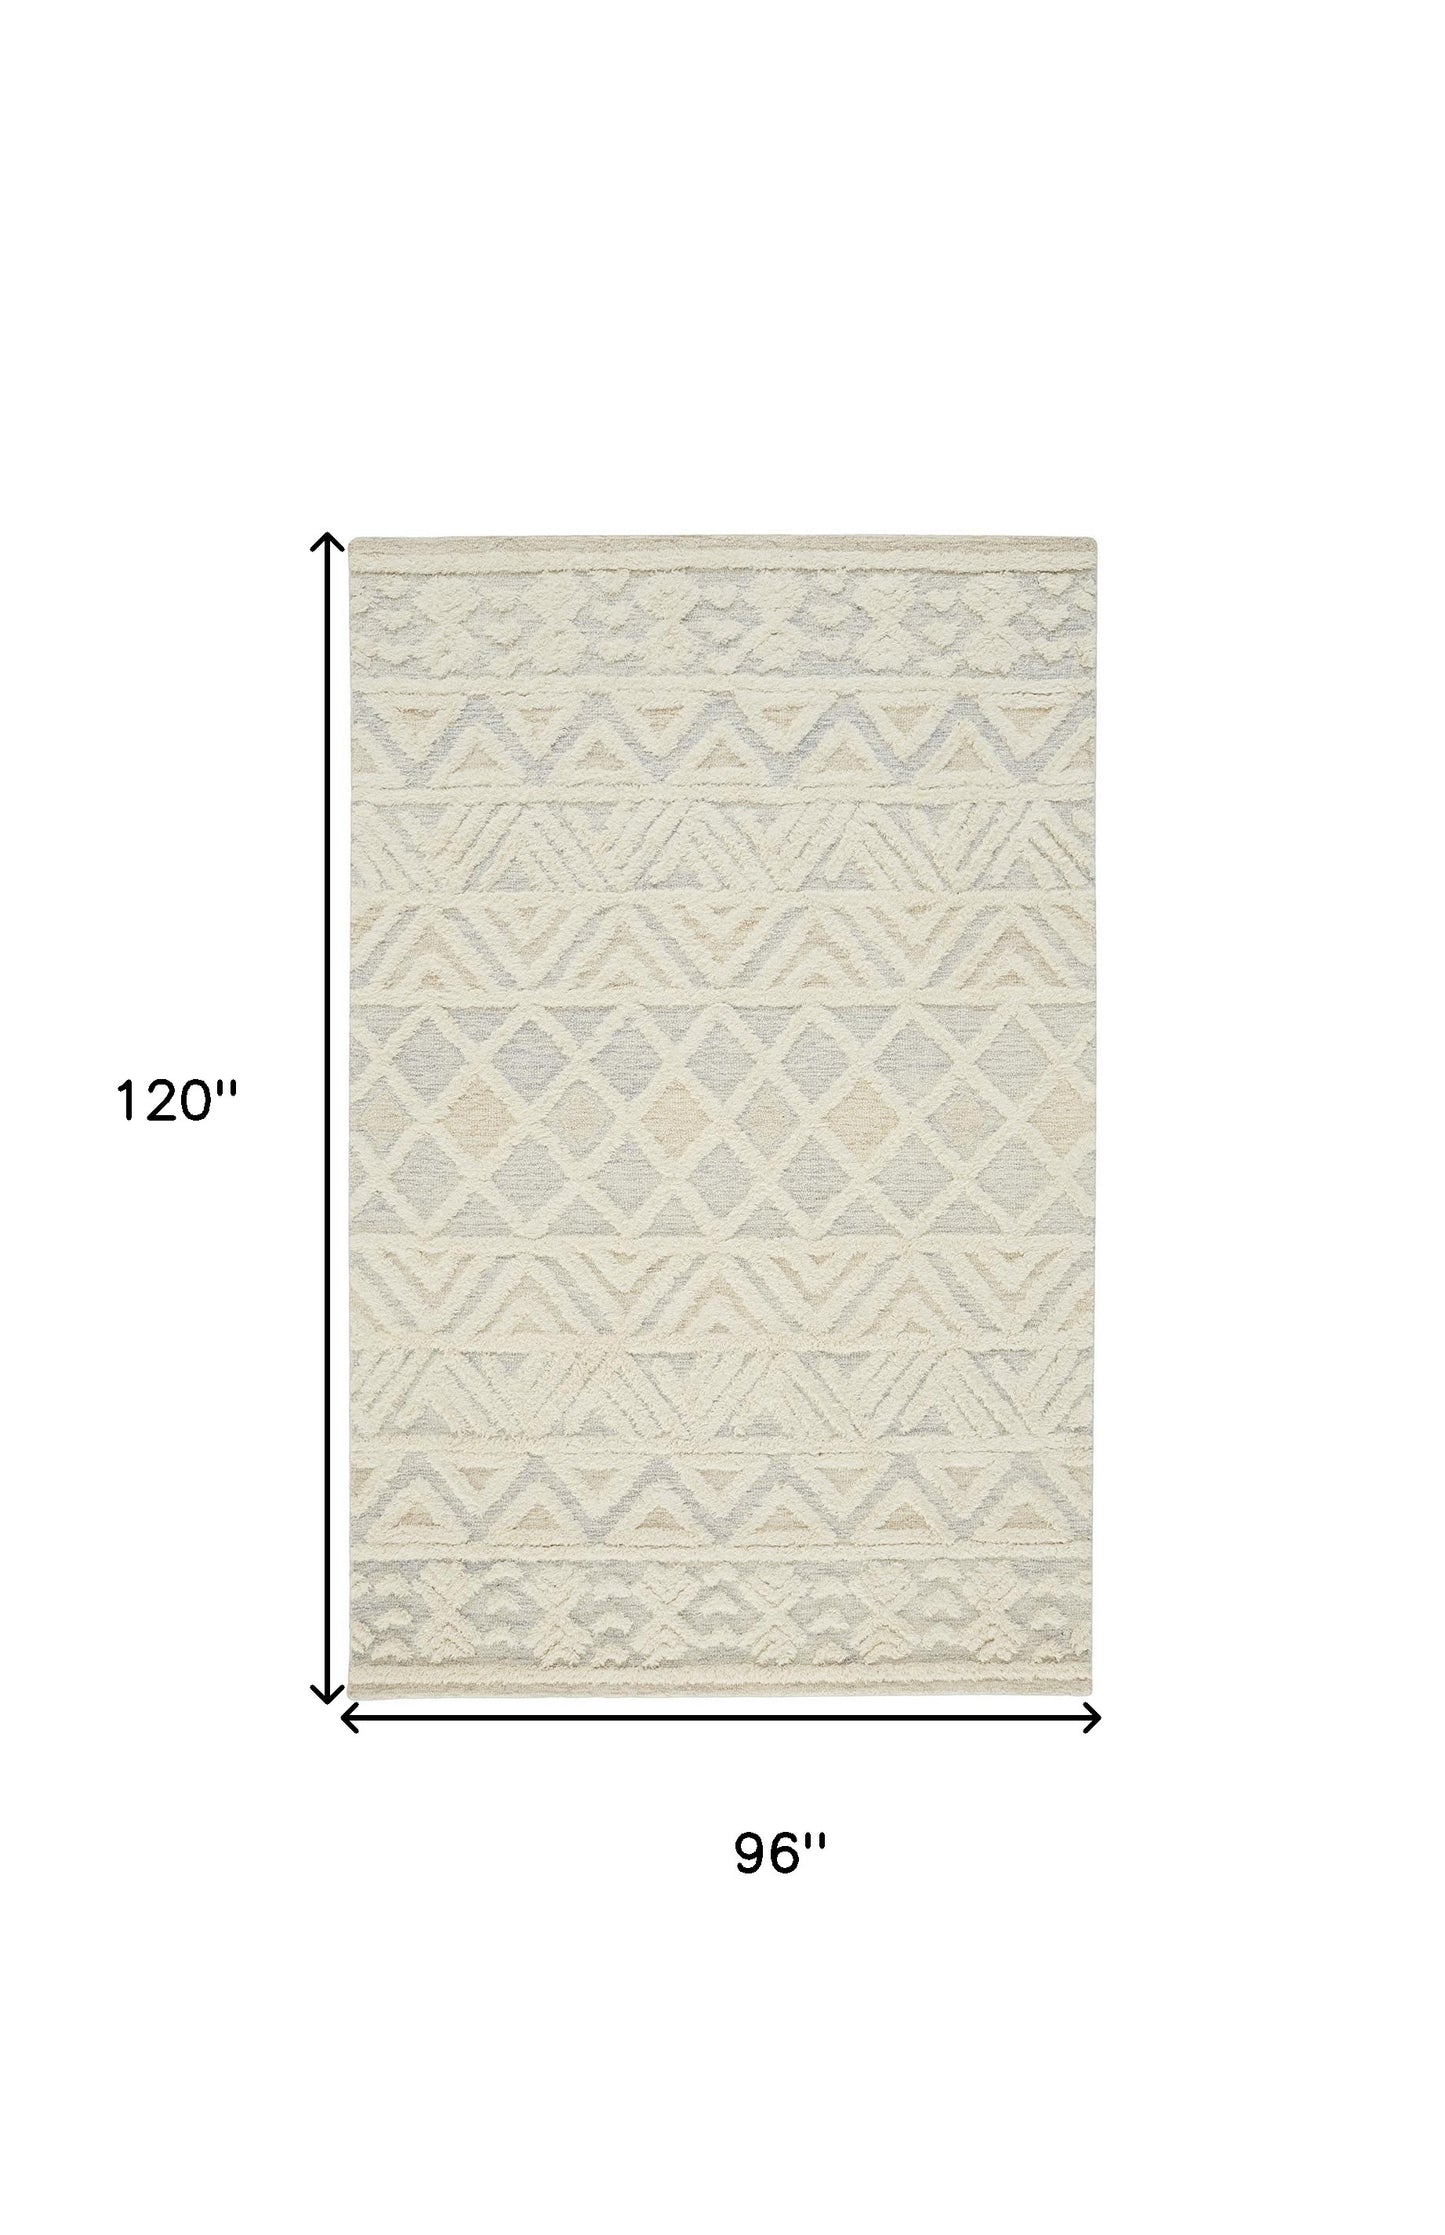 4' X 6' Ivory Blue And Tan Wool Geometric Tufted Handmade Stain Resistant Area Rug